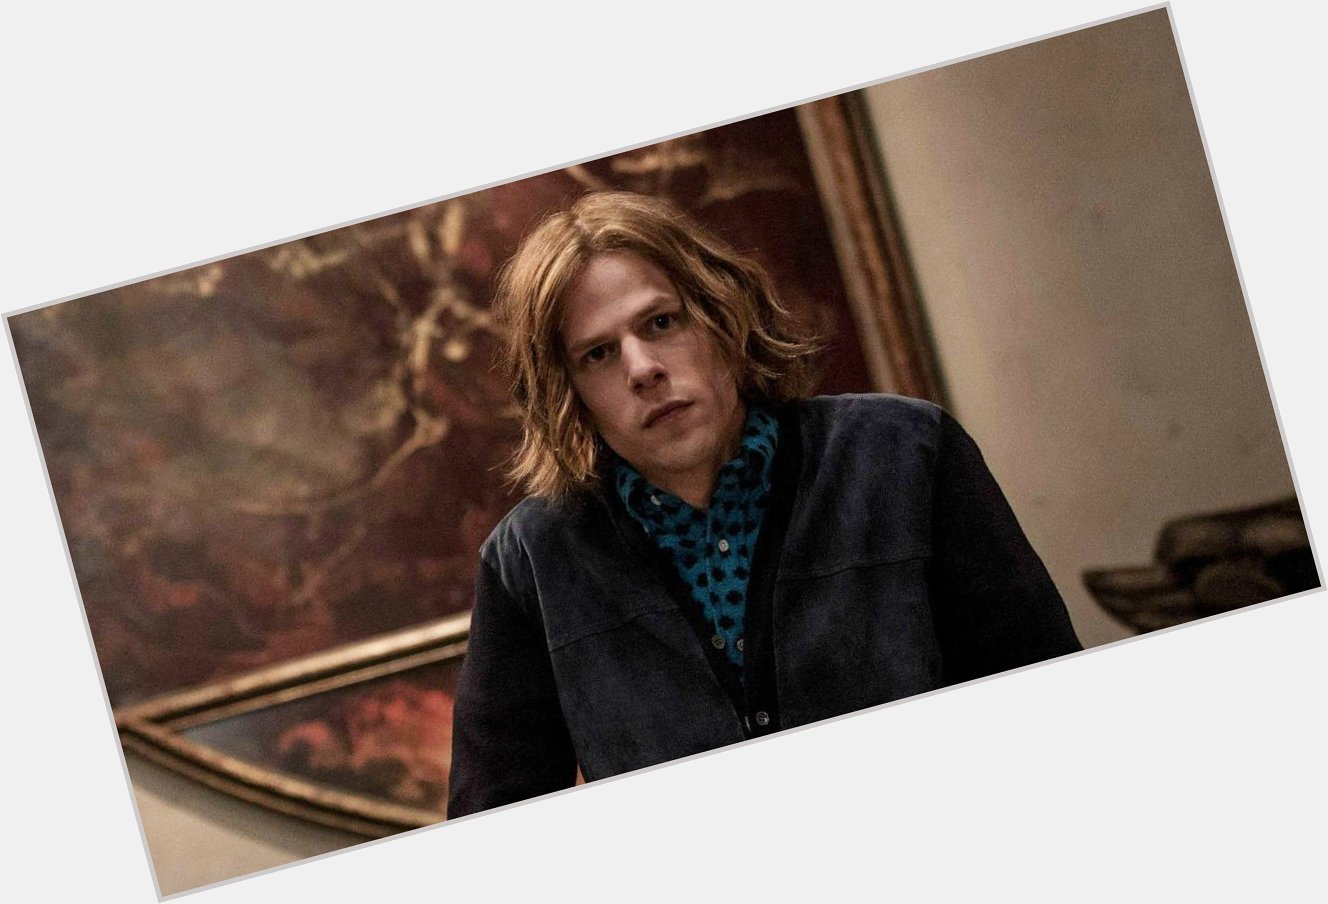 Happy birthday to Jesse Eisenberg! I hope we get to see your crazy Lex Luthor again soon. 